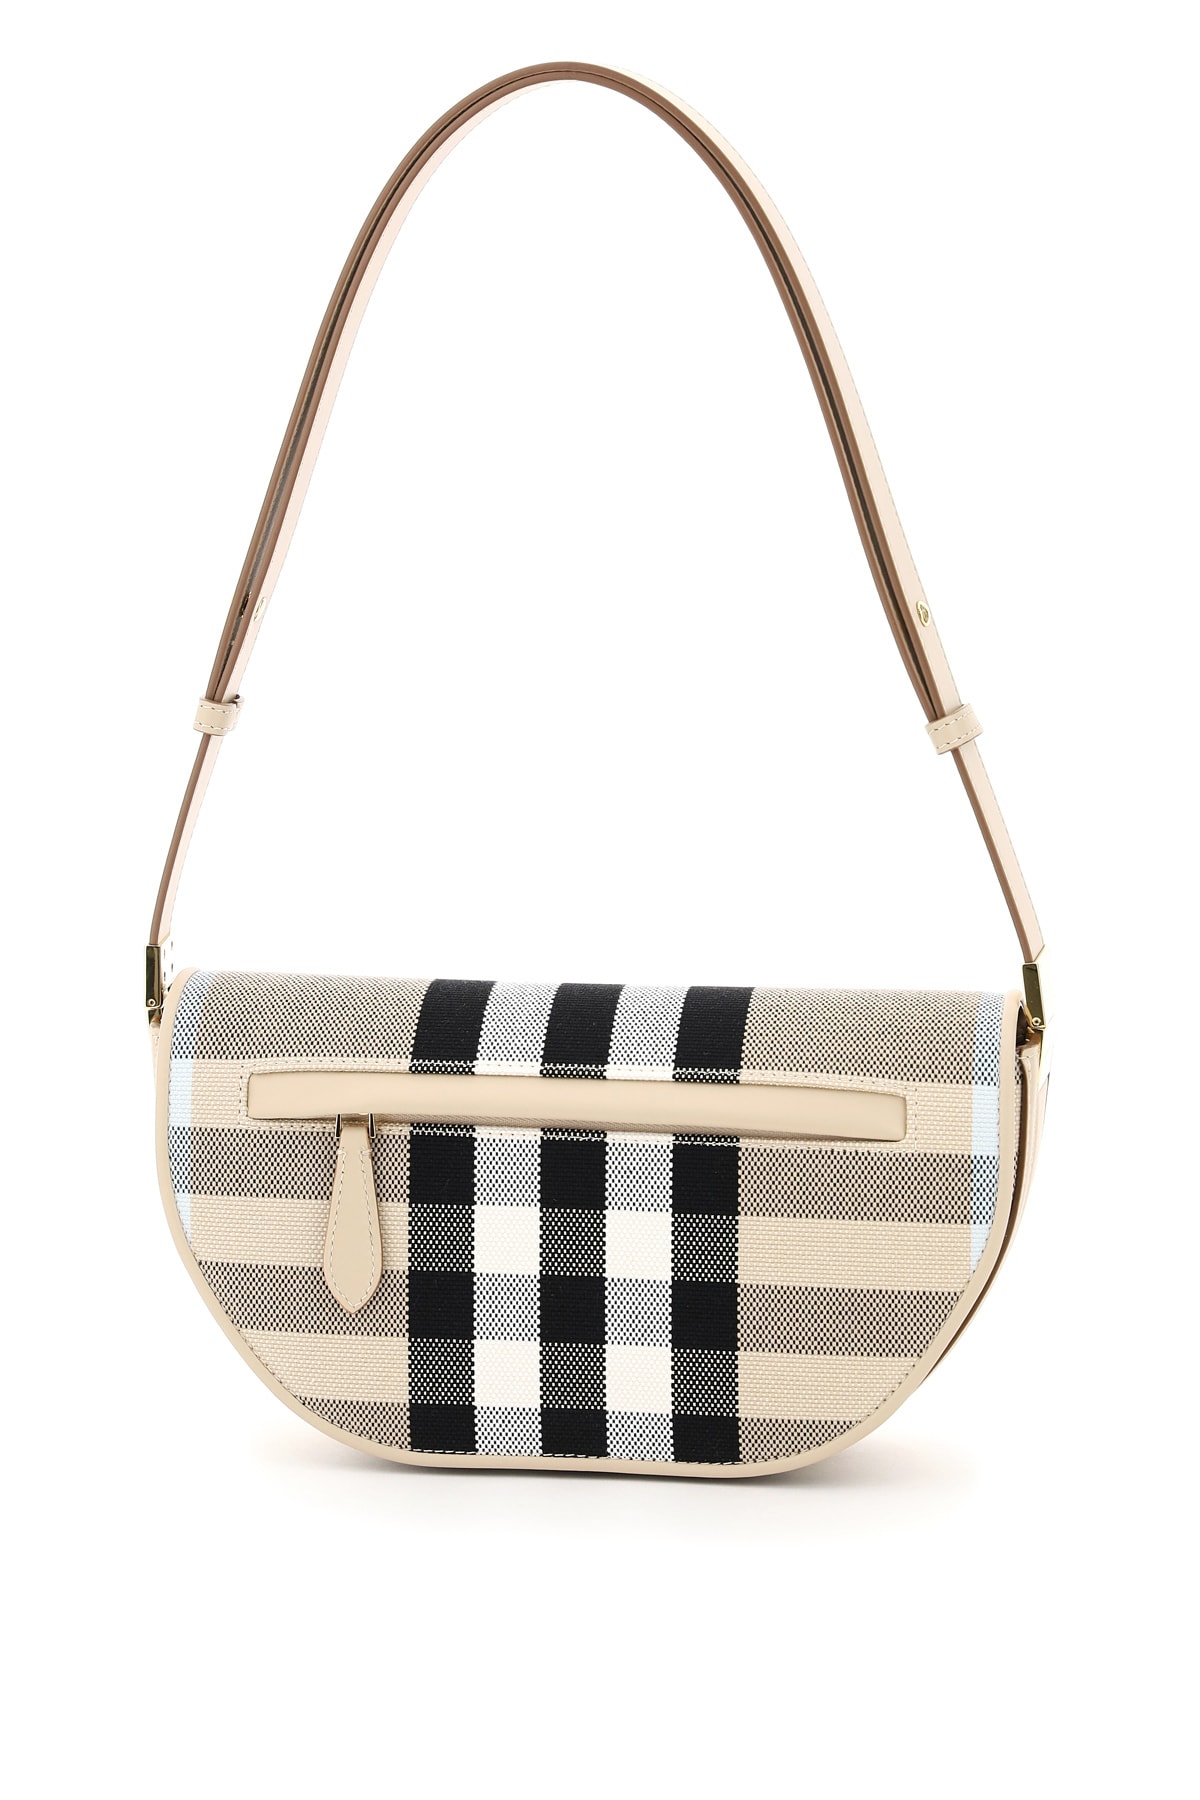 BURBERRY OLYMPIA SMALL SHOULDER BAG,11891246